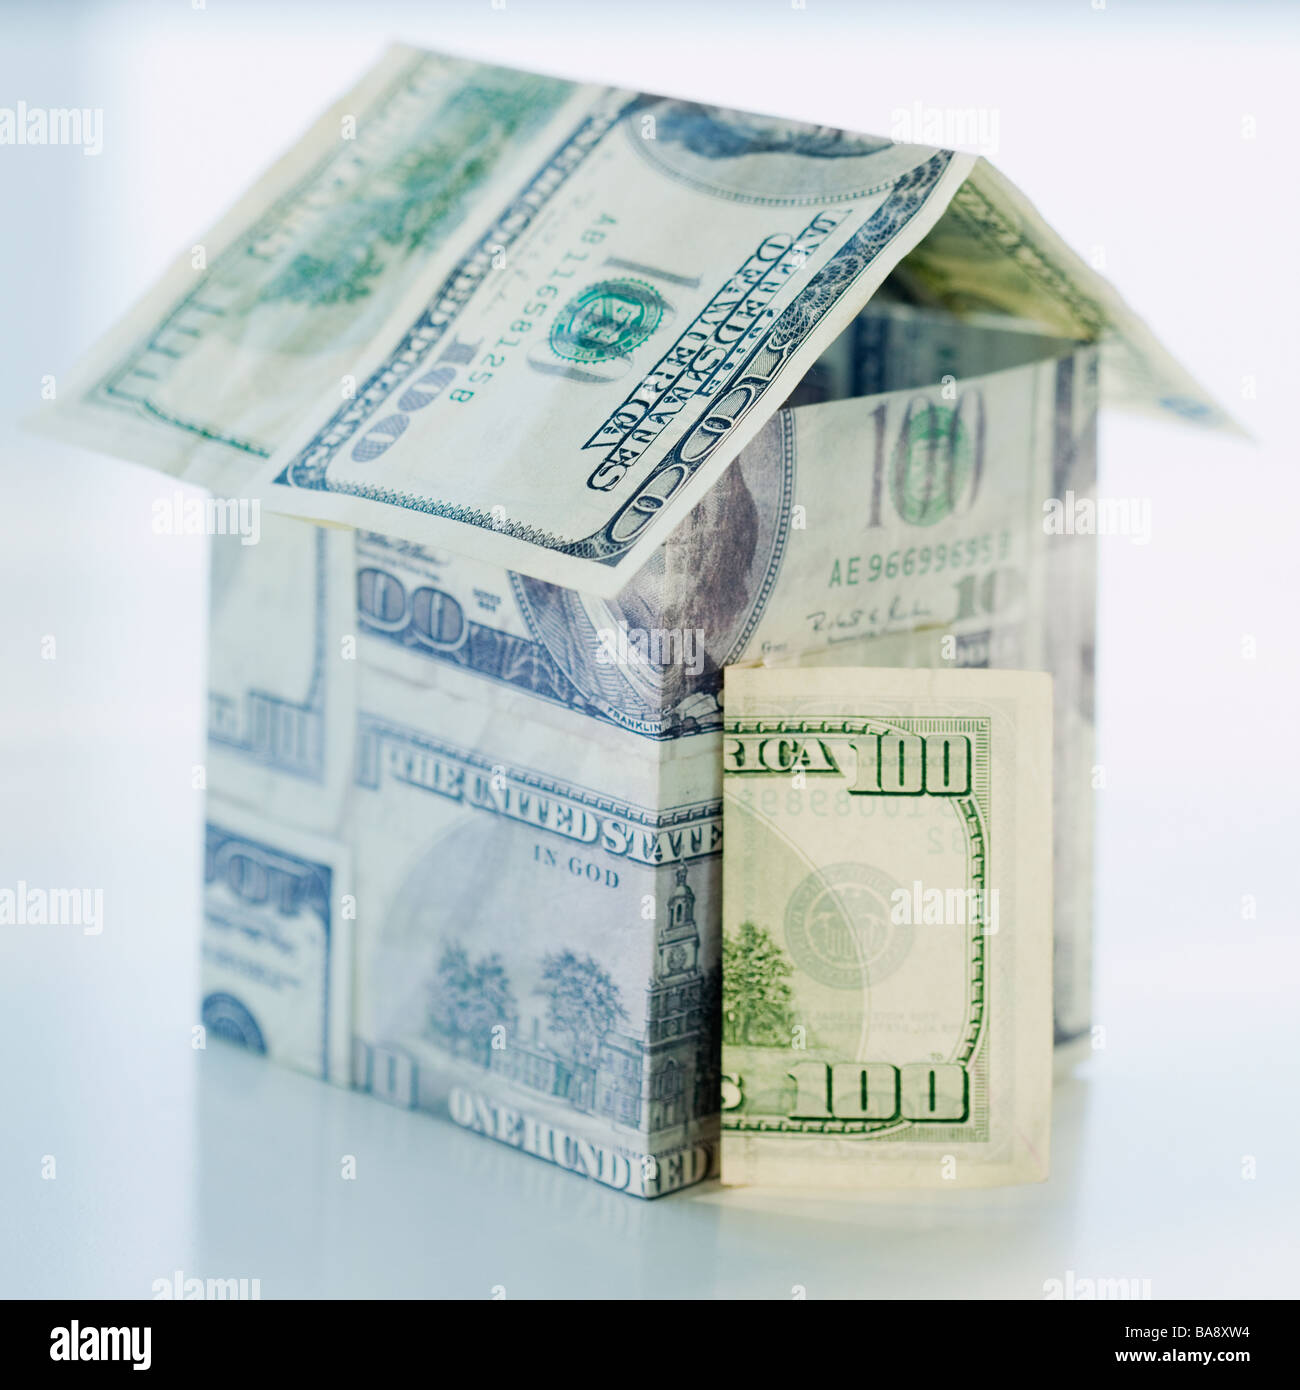 House made of paper money Stock Photo